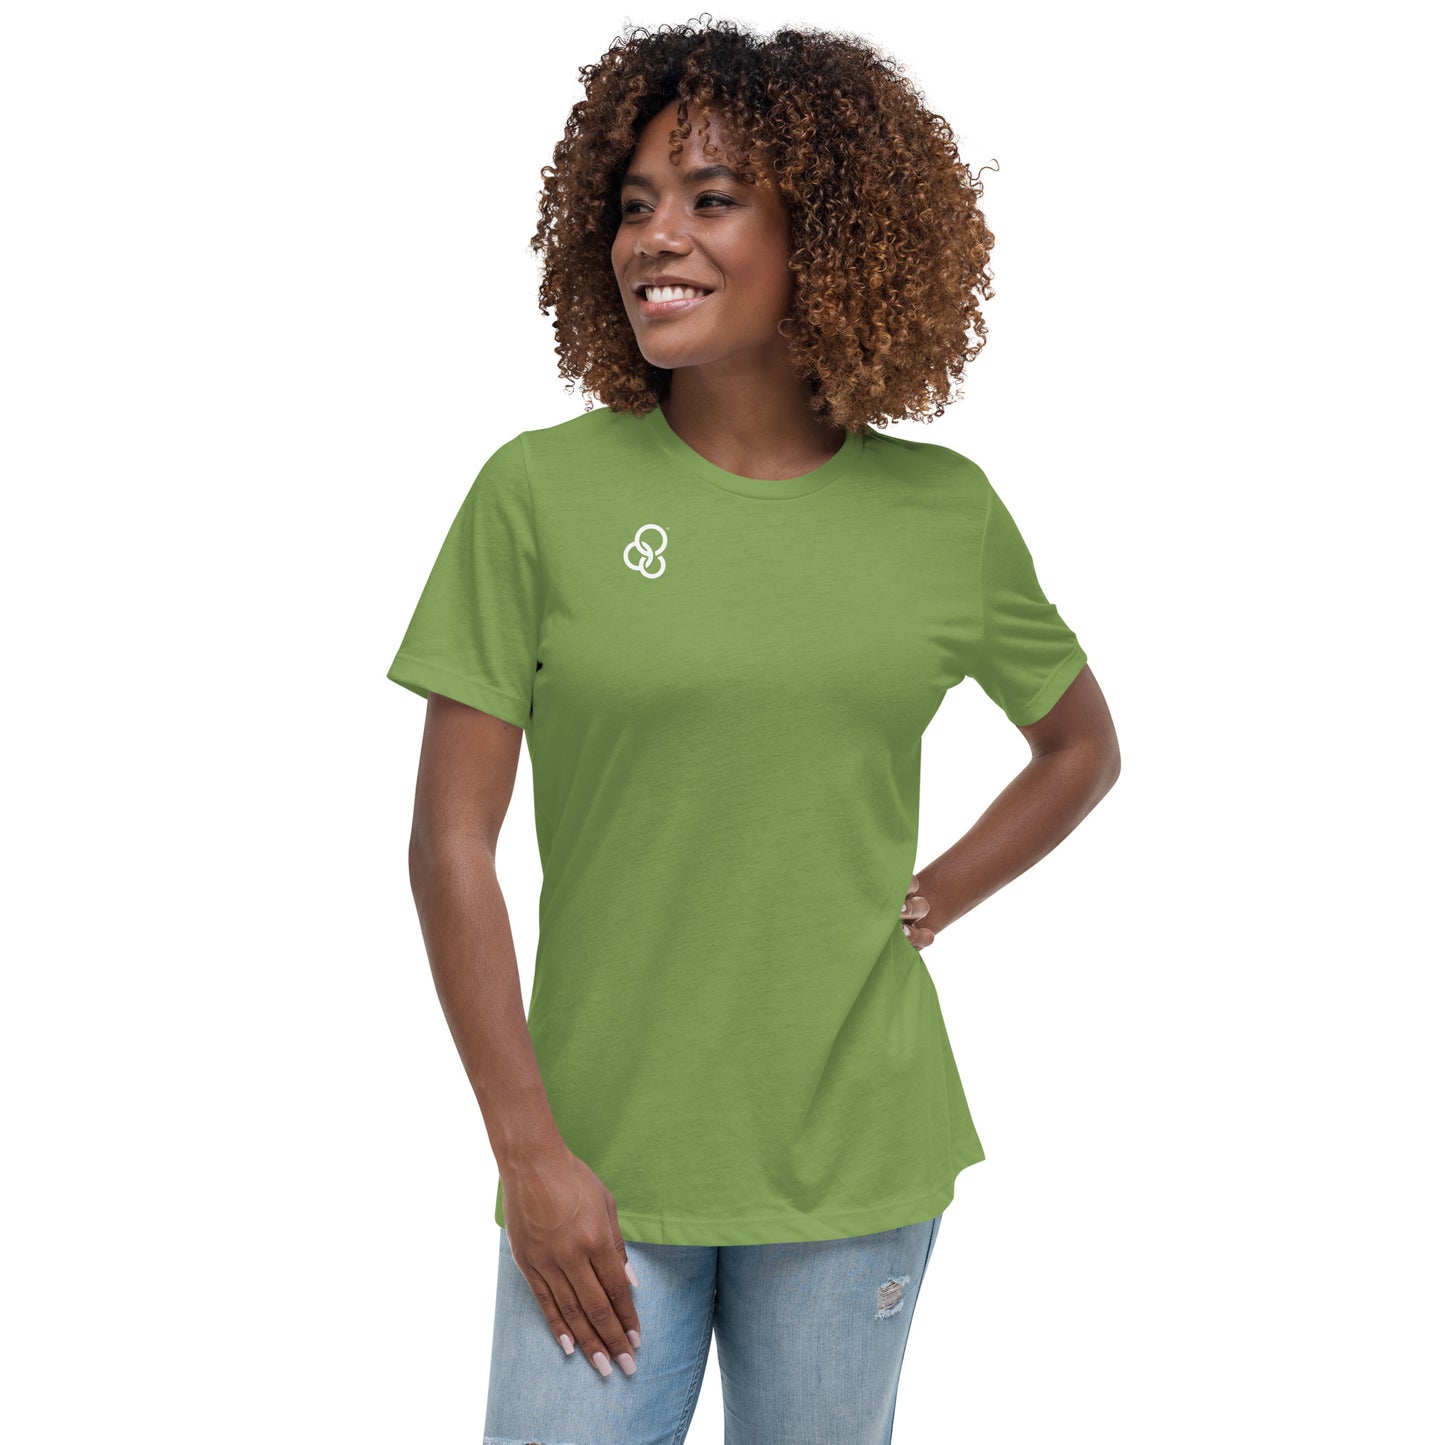 Campus Life Military Women's Relaxed T-Shirt